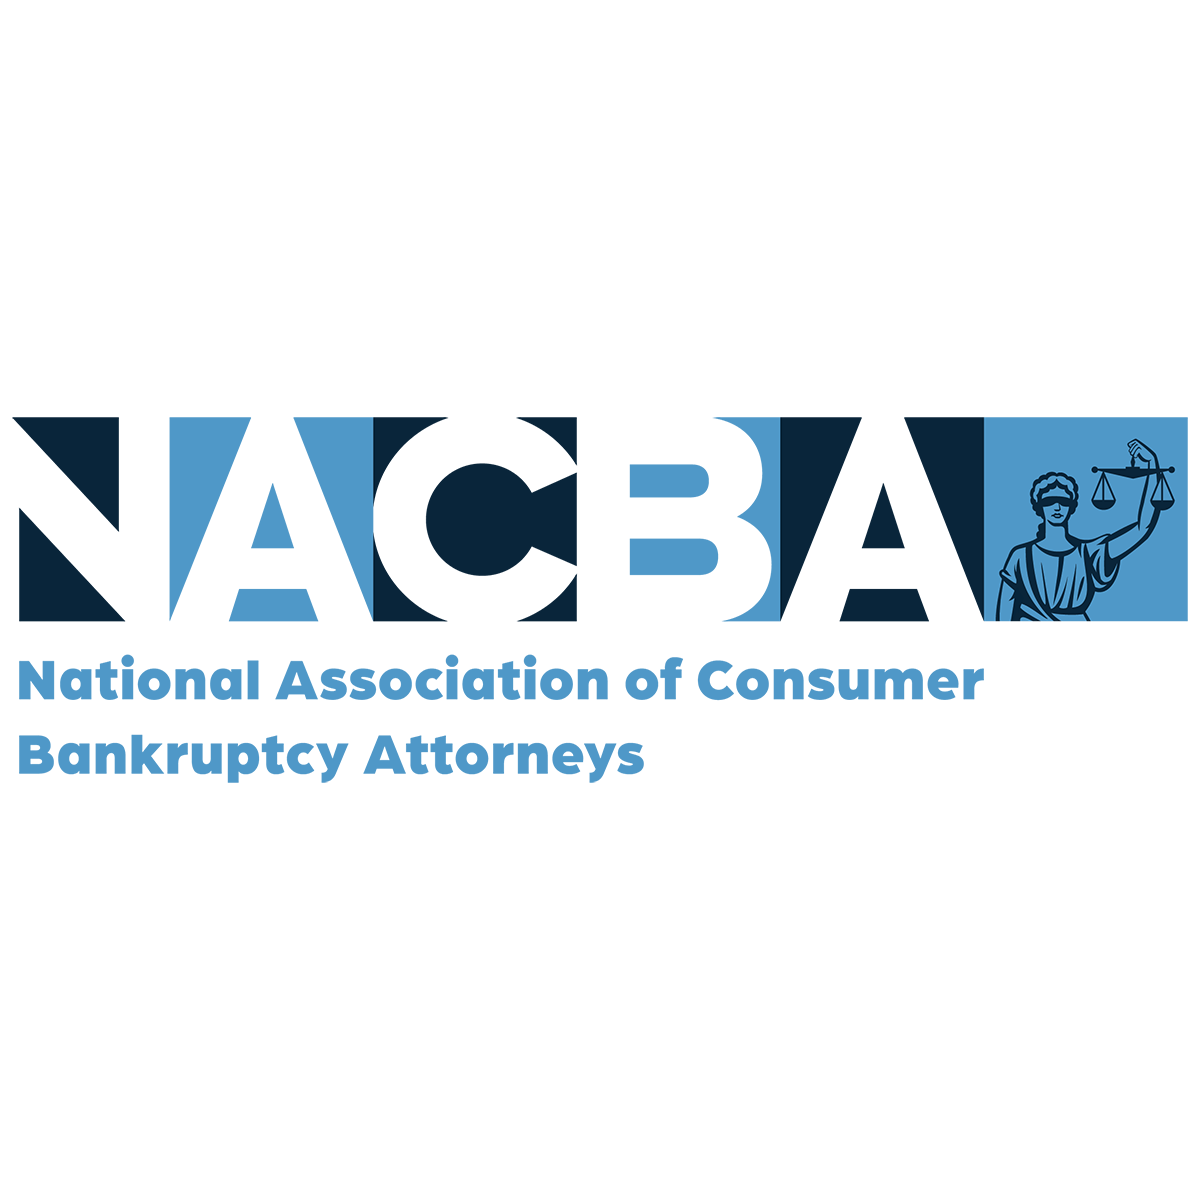 NACBA - National Association of Consumer Bankruptcy Attorneys